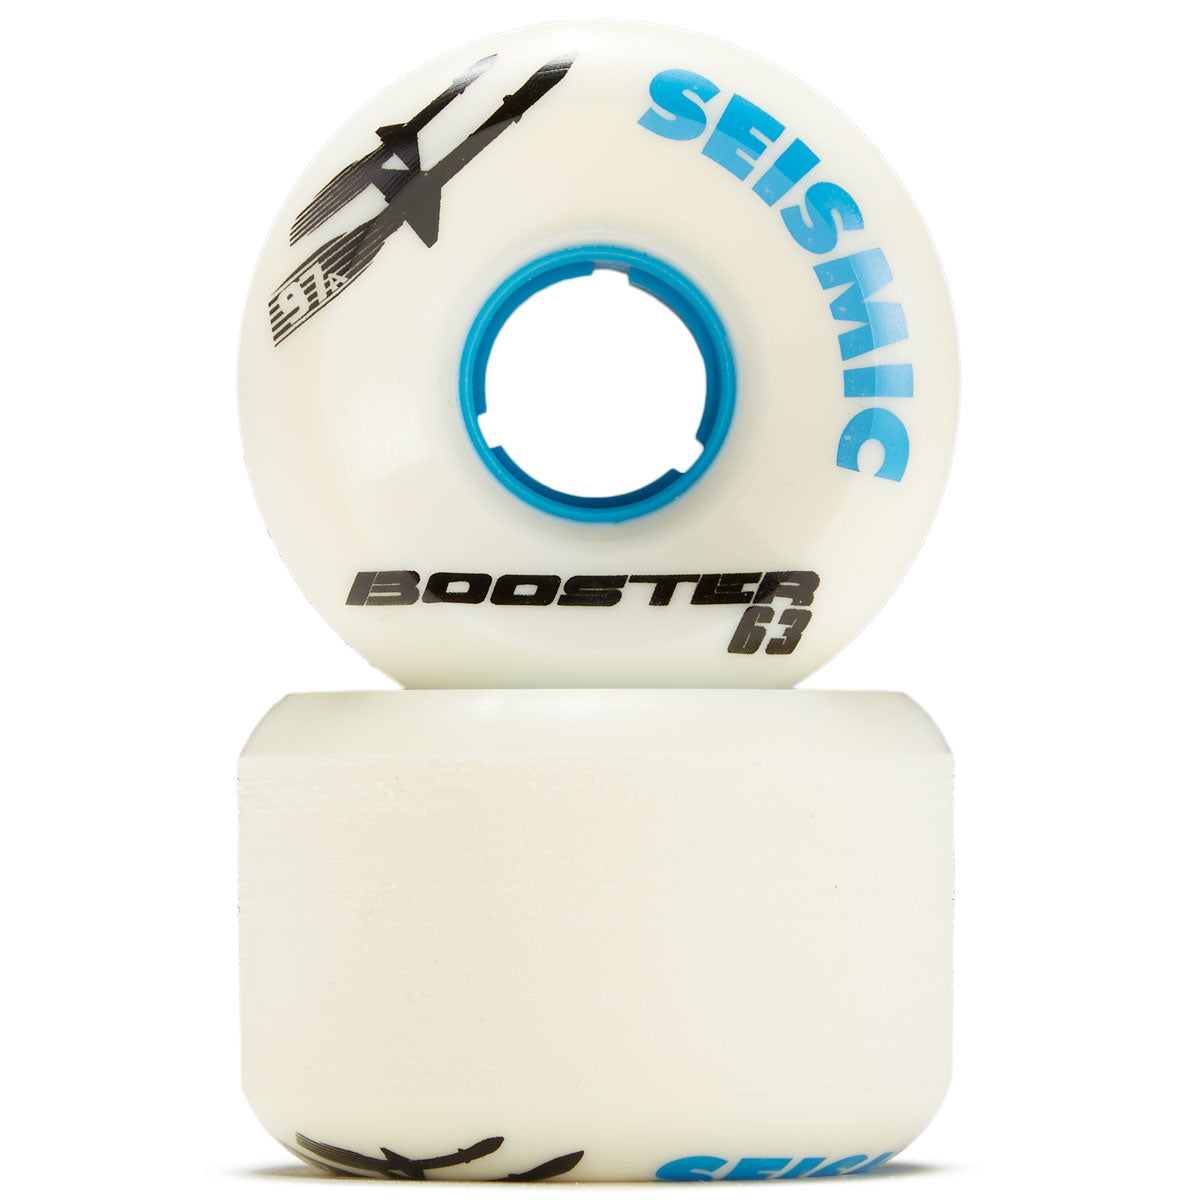 Seismic Booster 97a Longboard Wheels - White - 63mm image 2